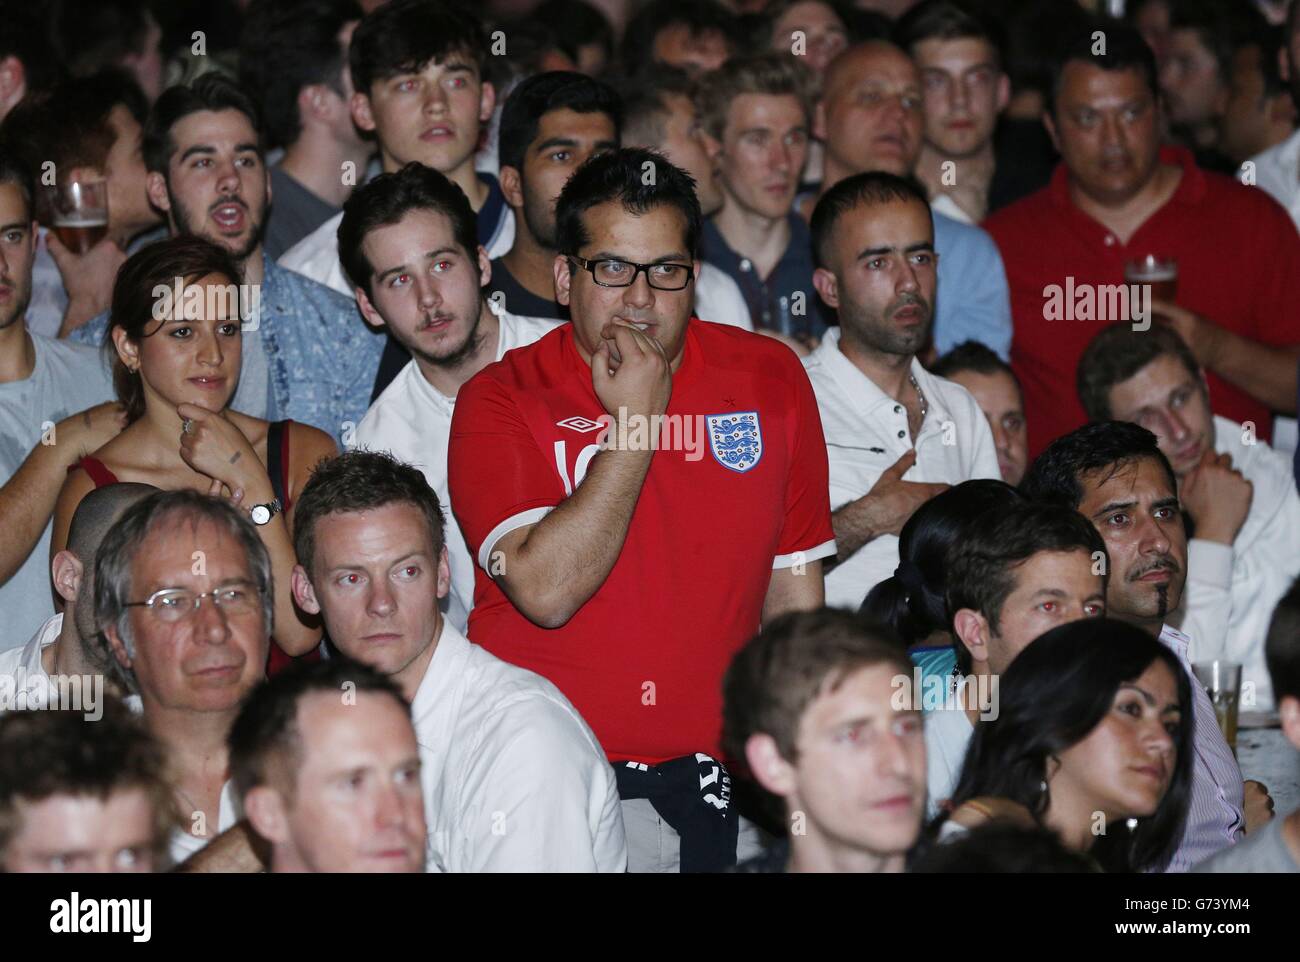 Supporters in the Walkabout Temple, Temple Place in central London watch the England v Italy Group Stage game in the 2014 Fifa World Cup in Brazil. Stock Photo